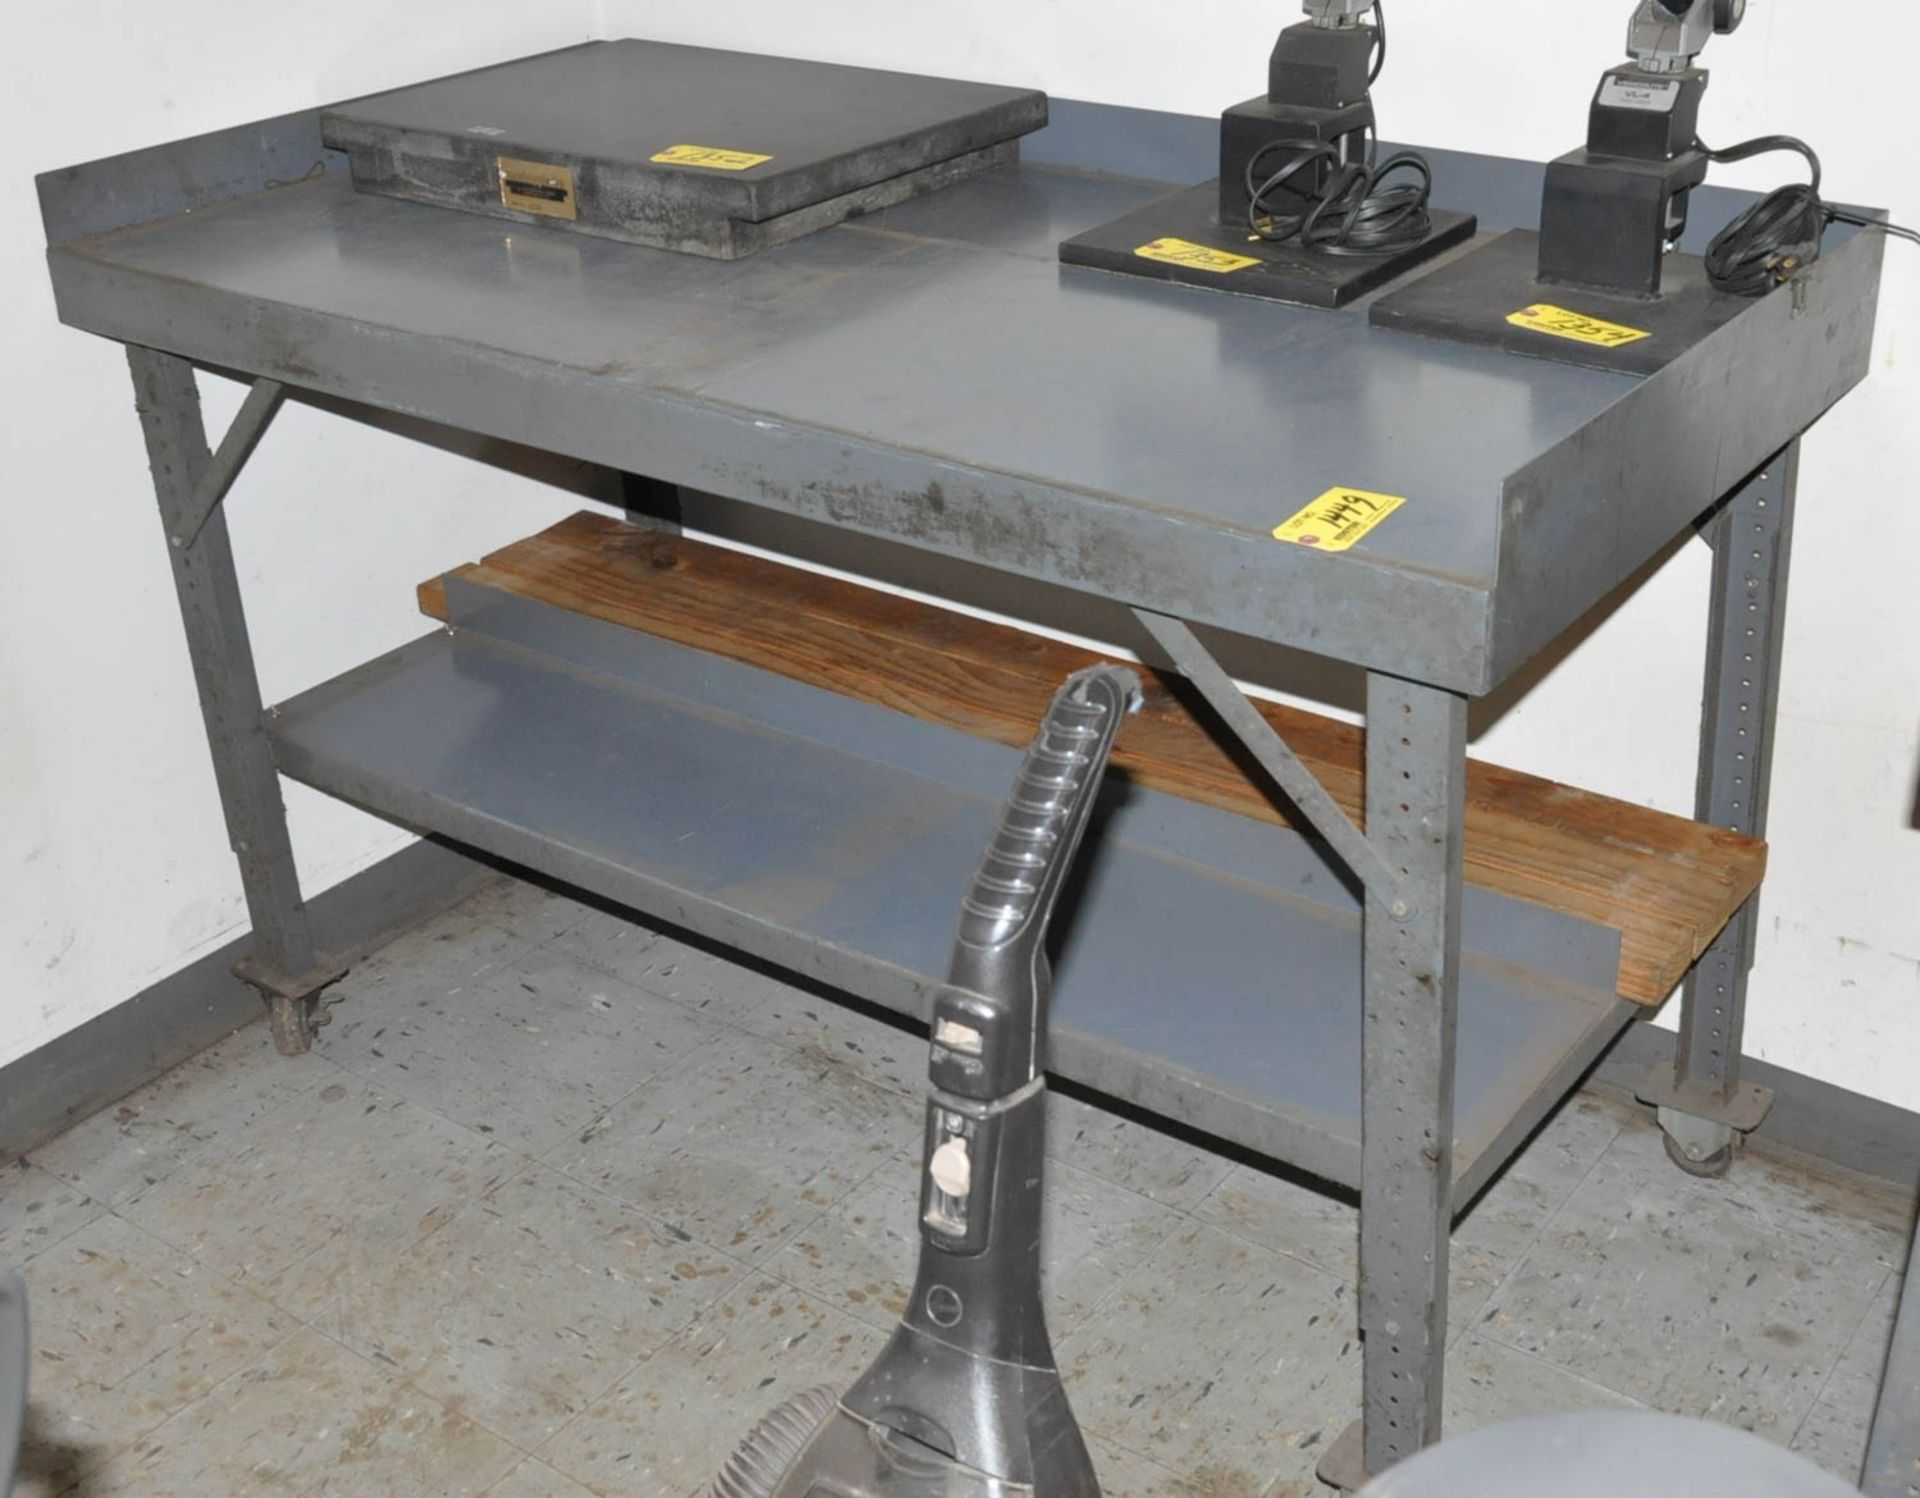 (2) 60" X 30" X 36" PORTABLE WORK BENCHES, (NOT TO BE REMOVED UNTIL EMPTY)